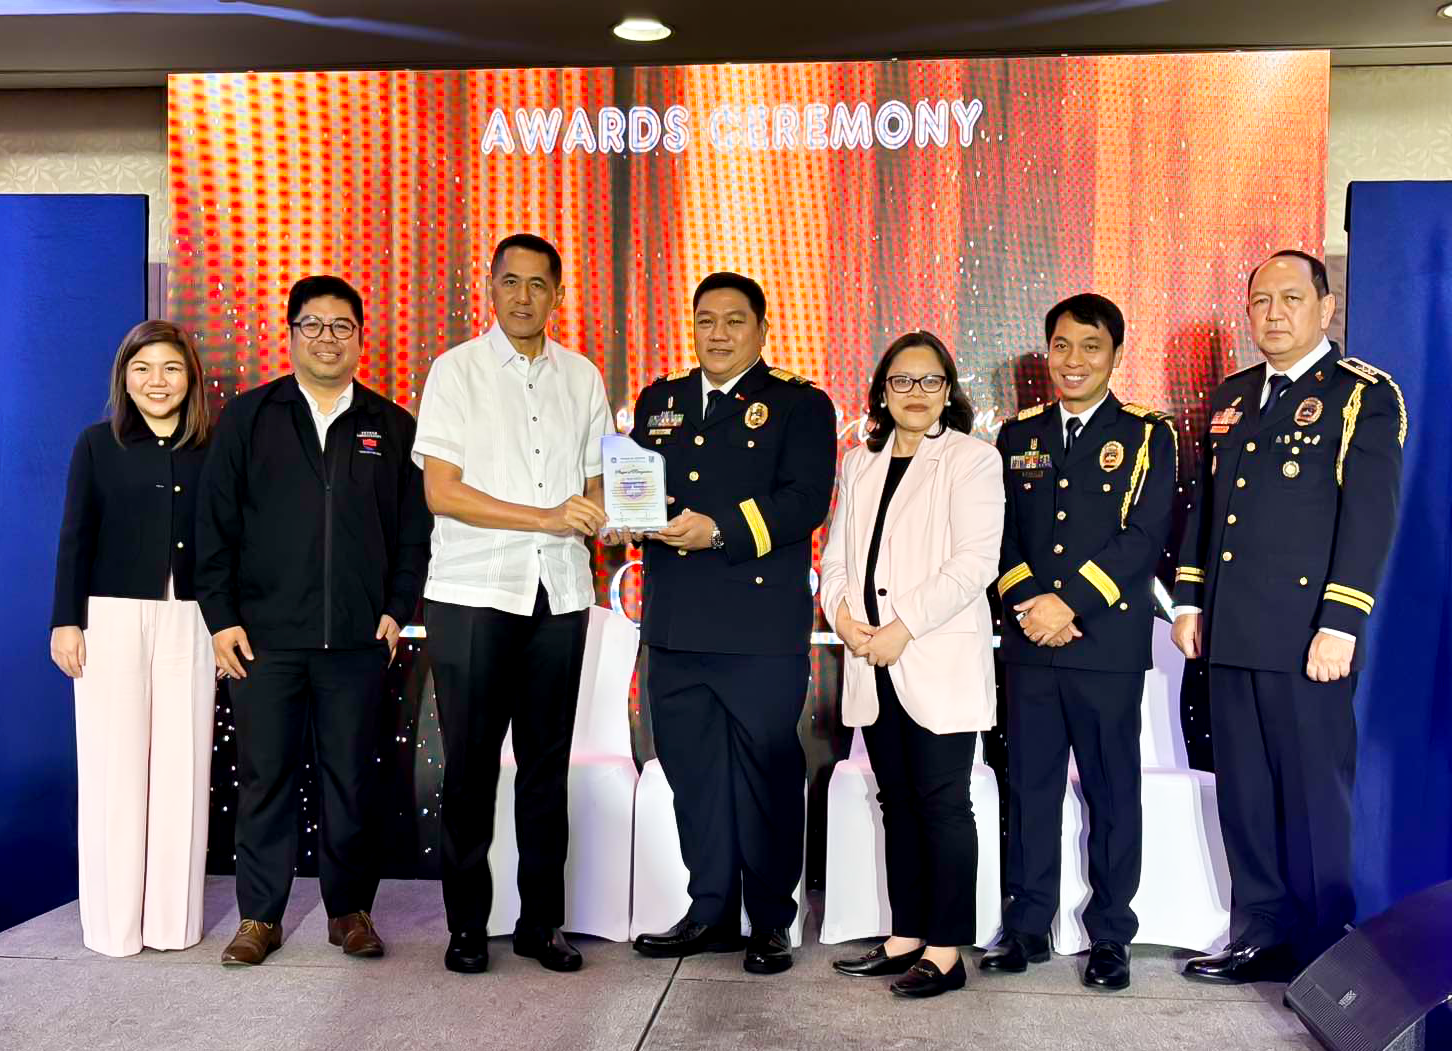 BOC recognizes Petron for being top fuel marking contributor